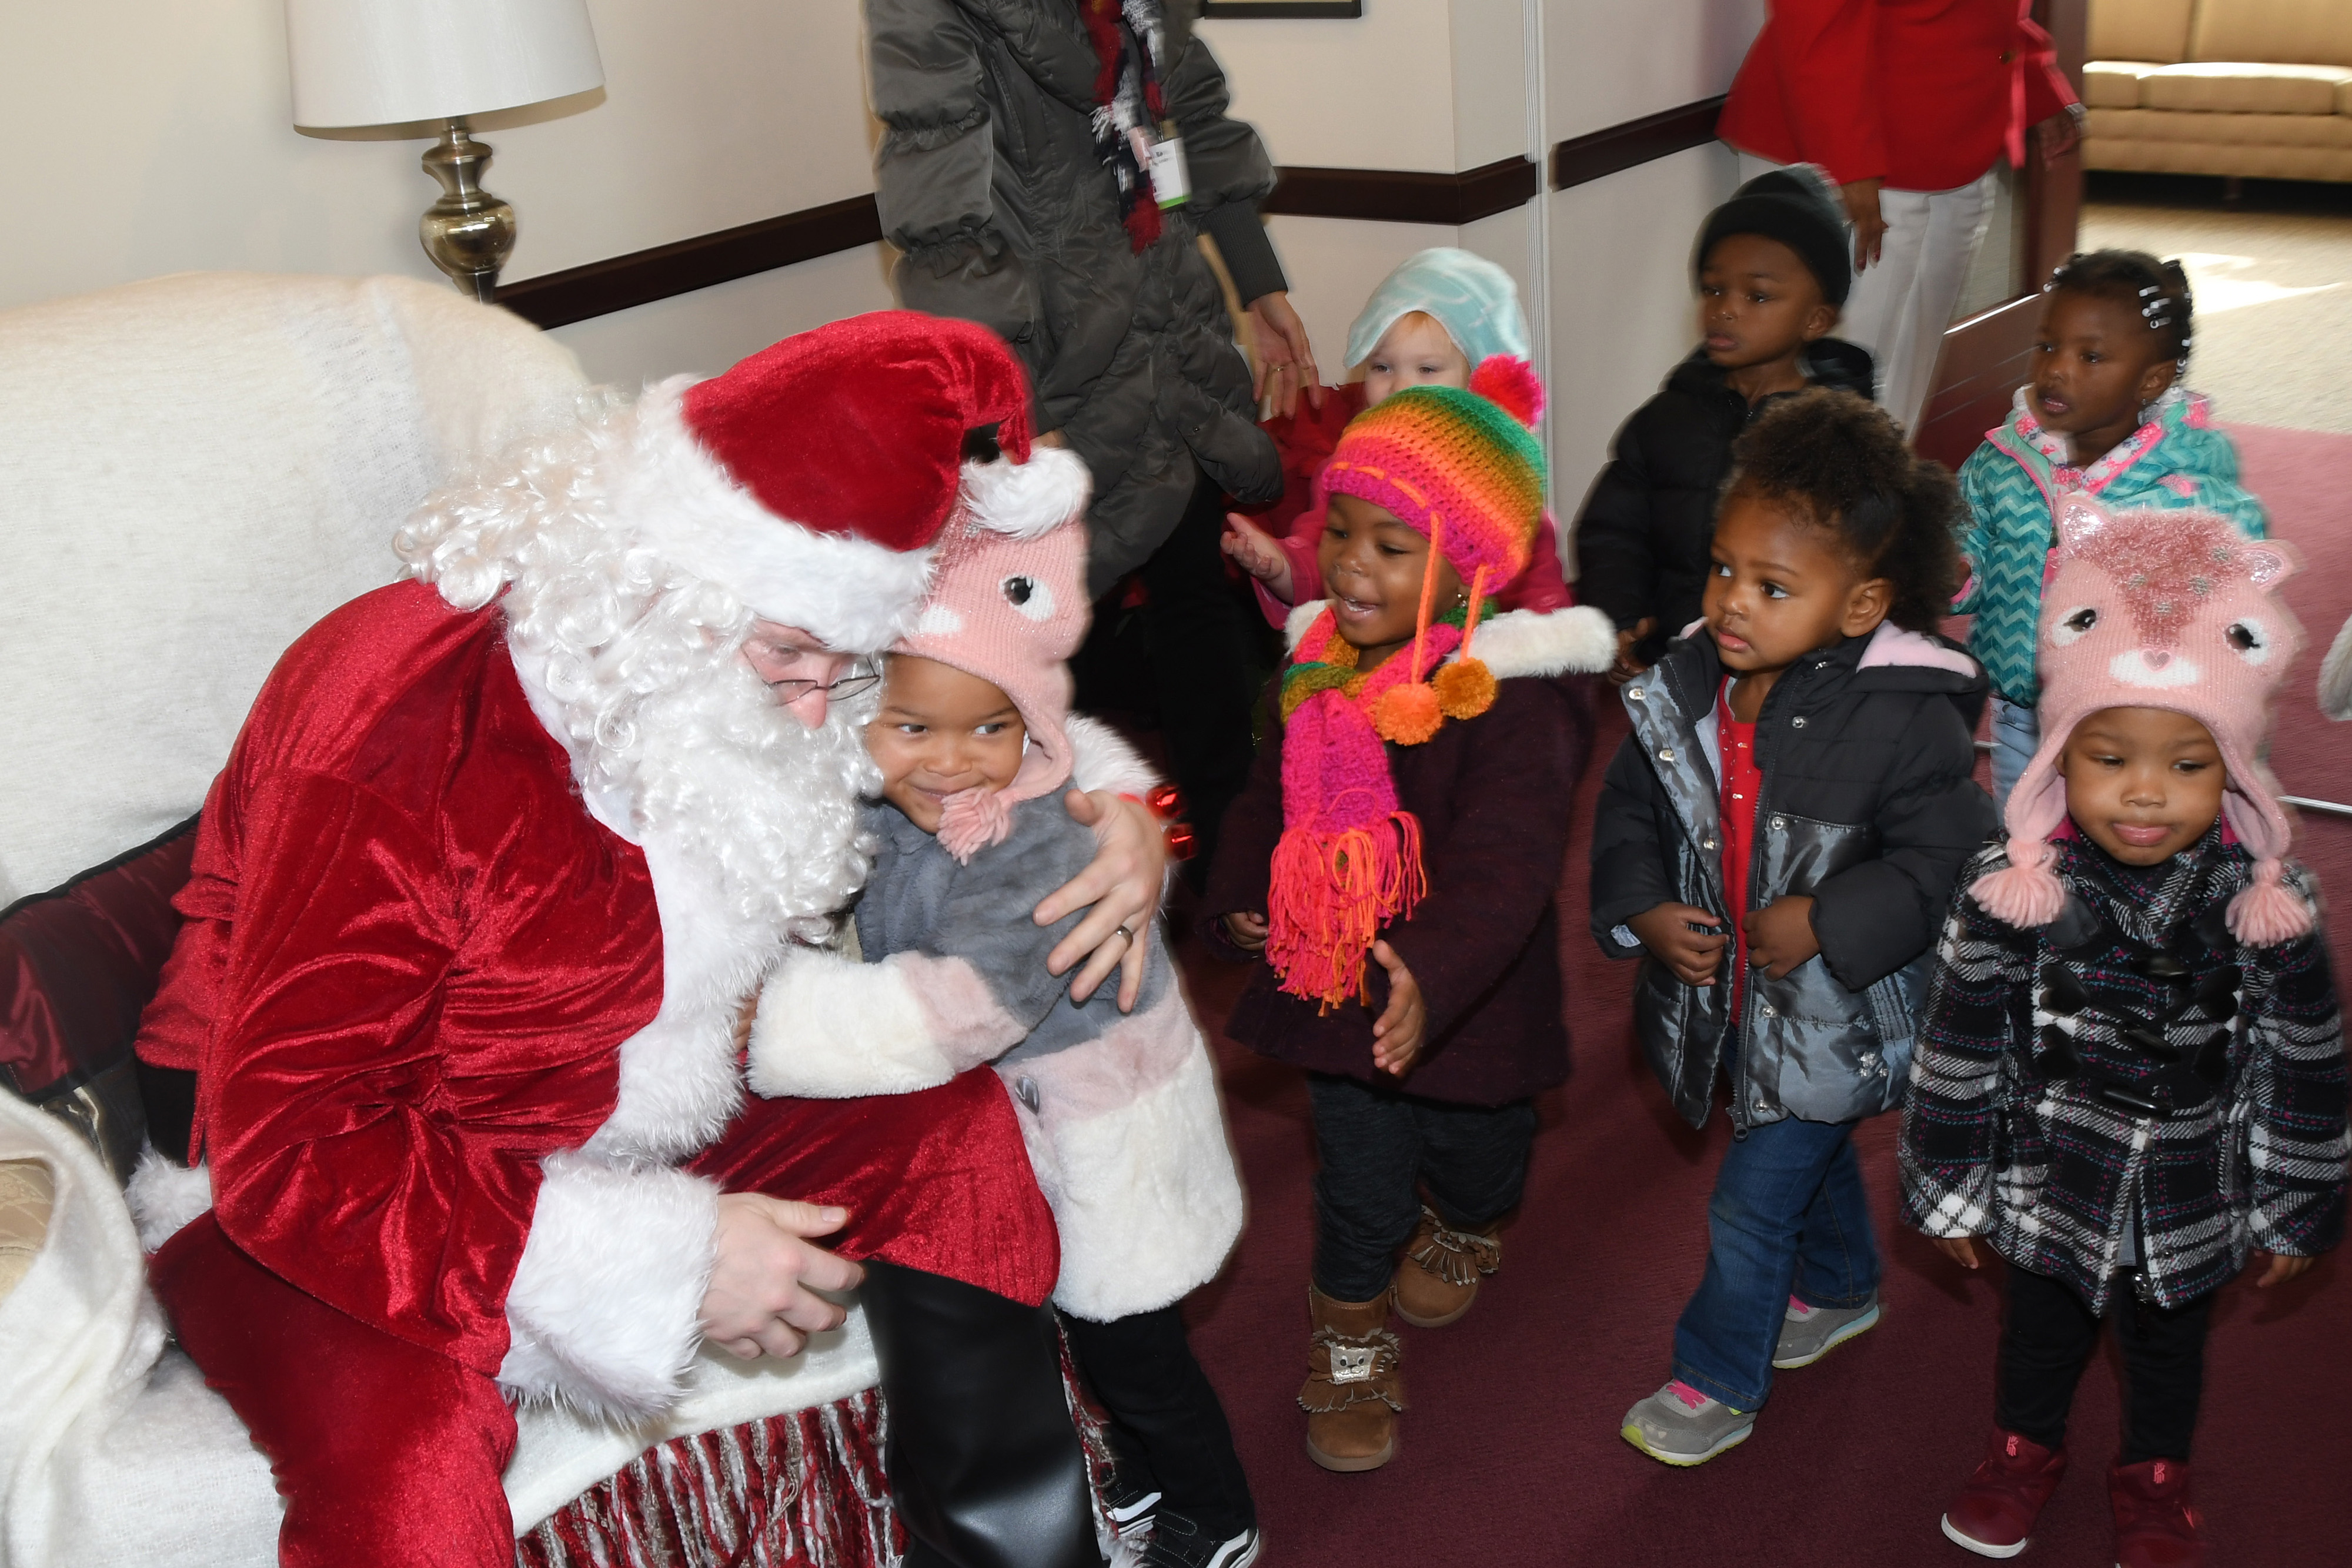 Santa Claus (portrayed by guess who?) greets the young ones of the Child Development Lab in the President's Office on Dec. 13.